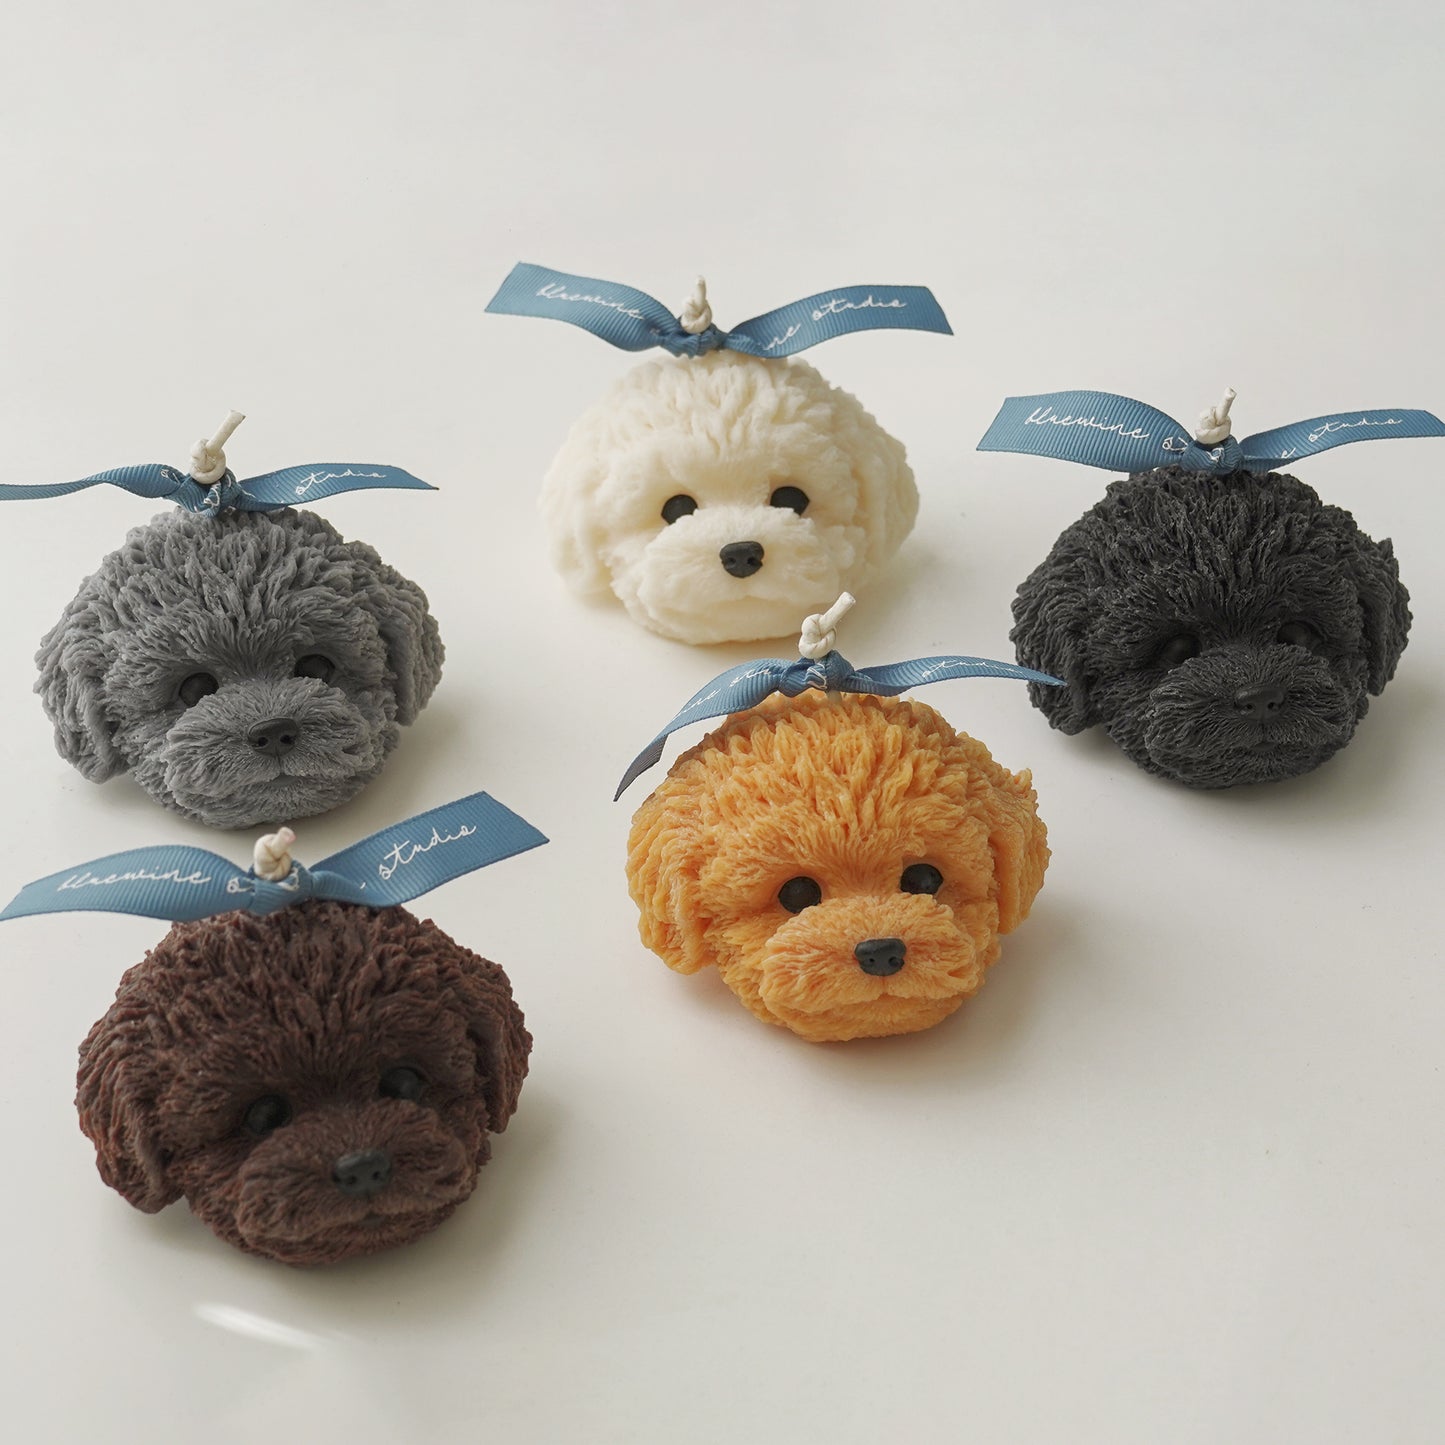 gray poodle, white bichon, chocolate poodle, goldendoodle, black poodle candle placed on a white table